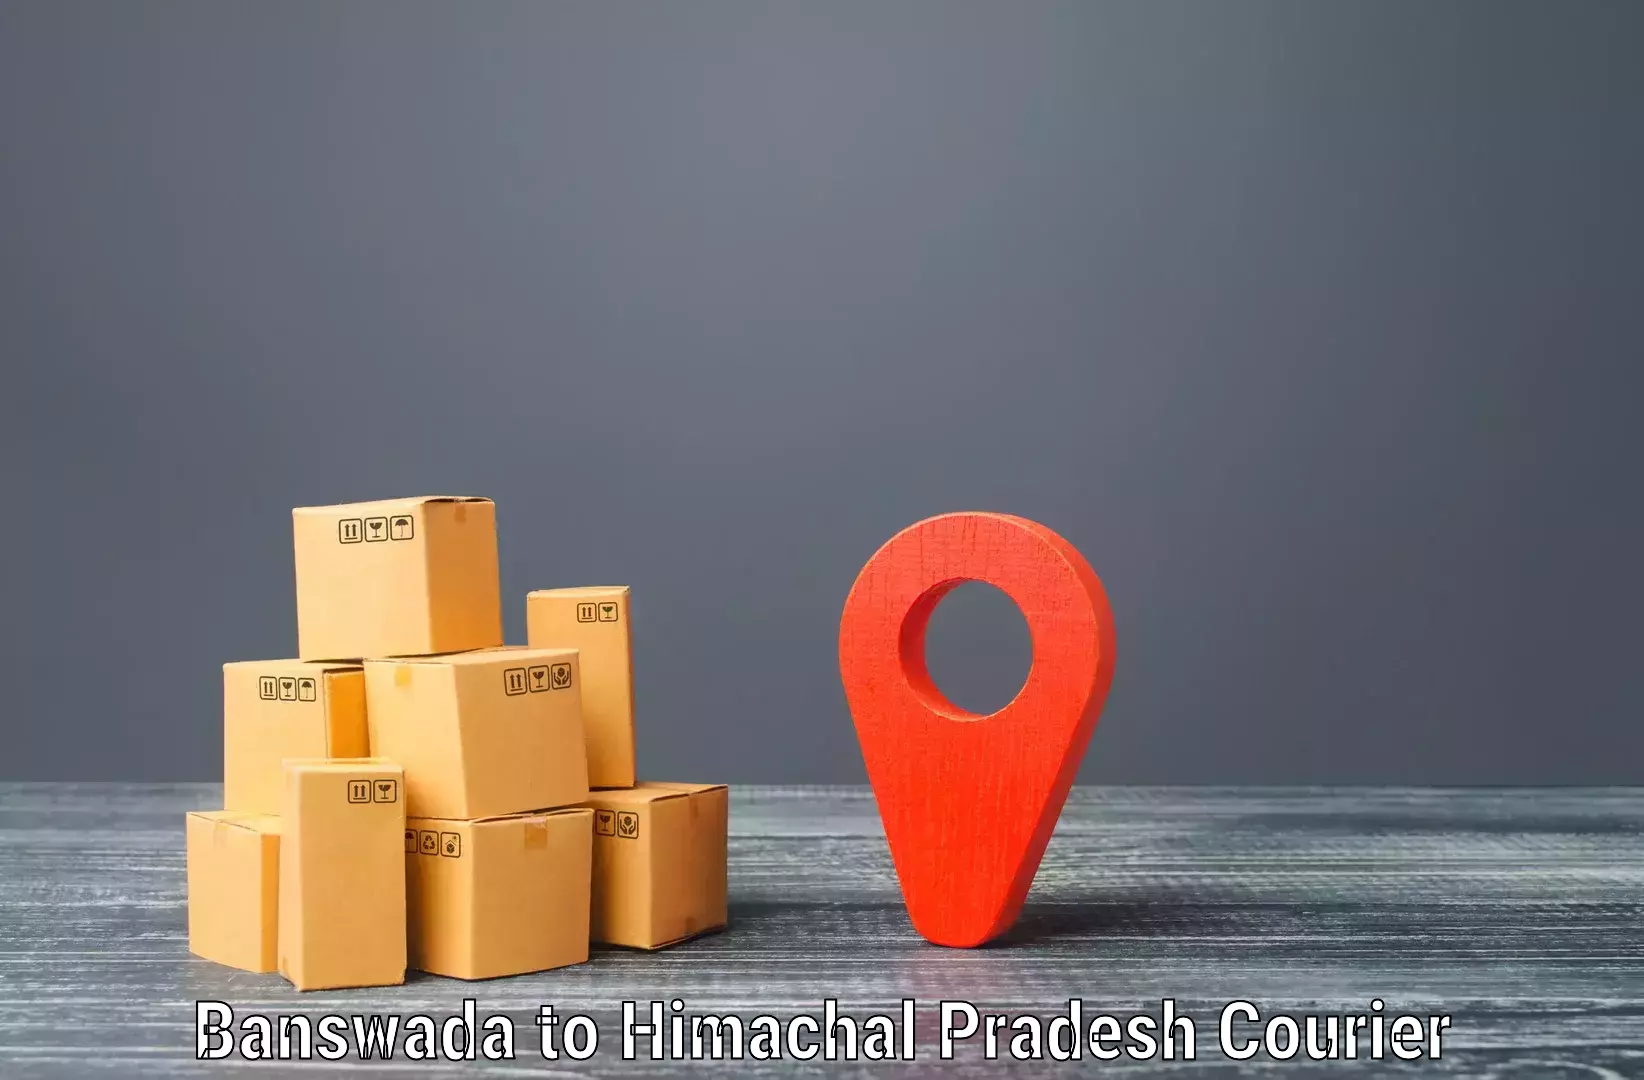 Express postal services in Banswada to Kunihar